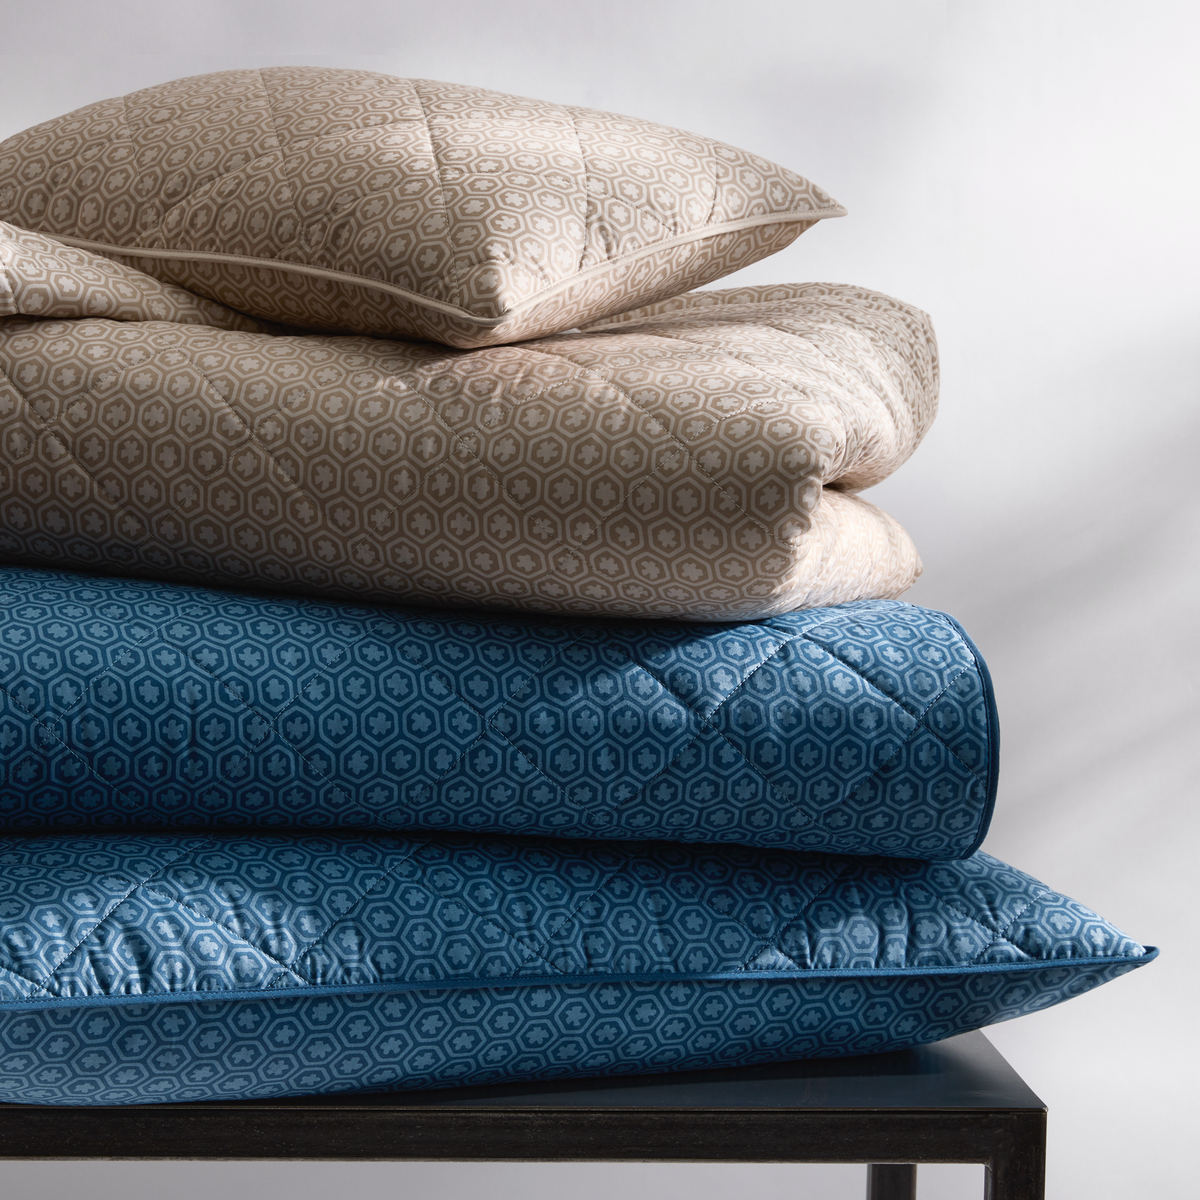 Stack of Quilted Matouk Schumacher Levi Bedding in Both Colors